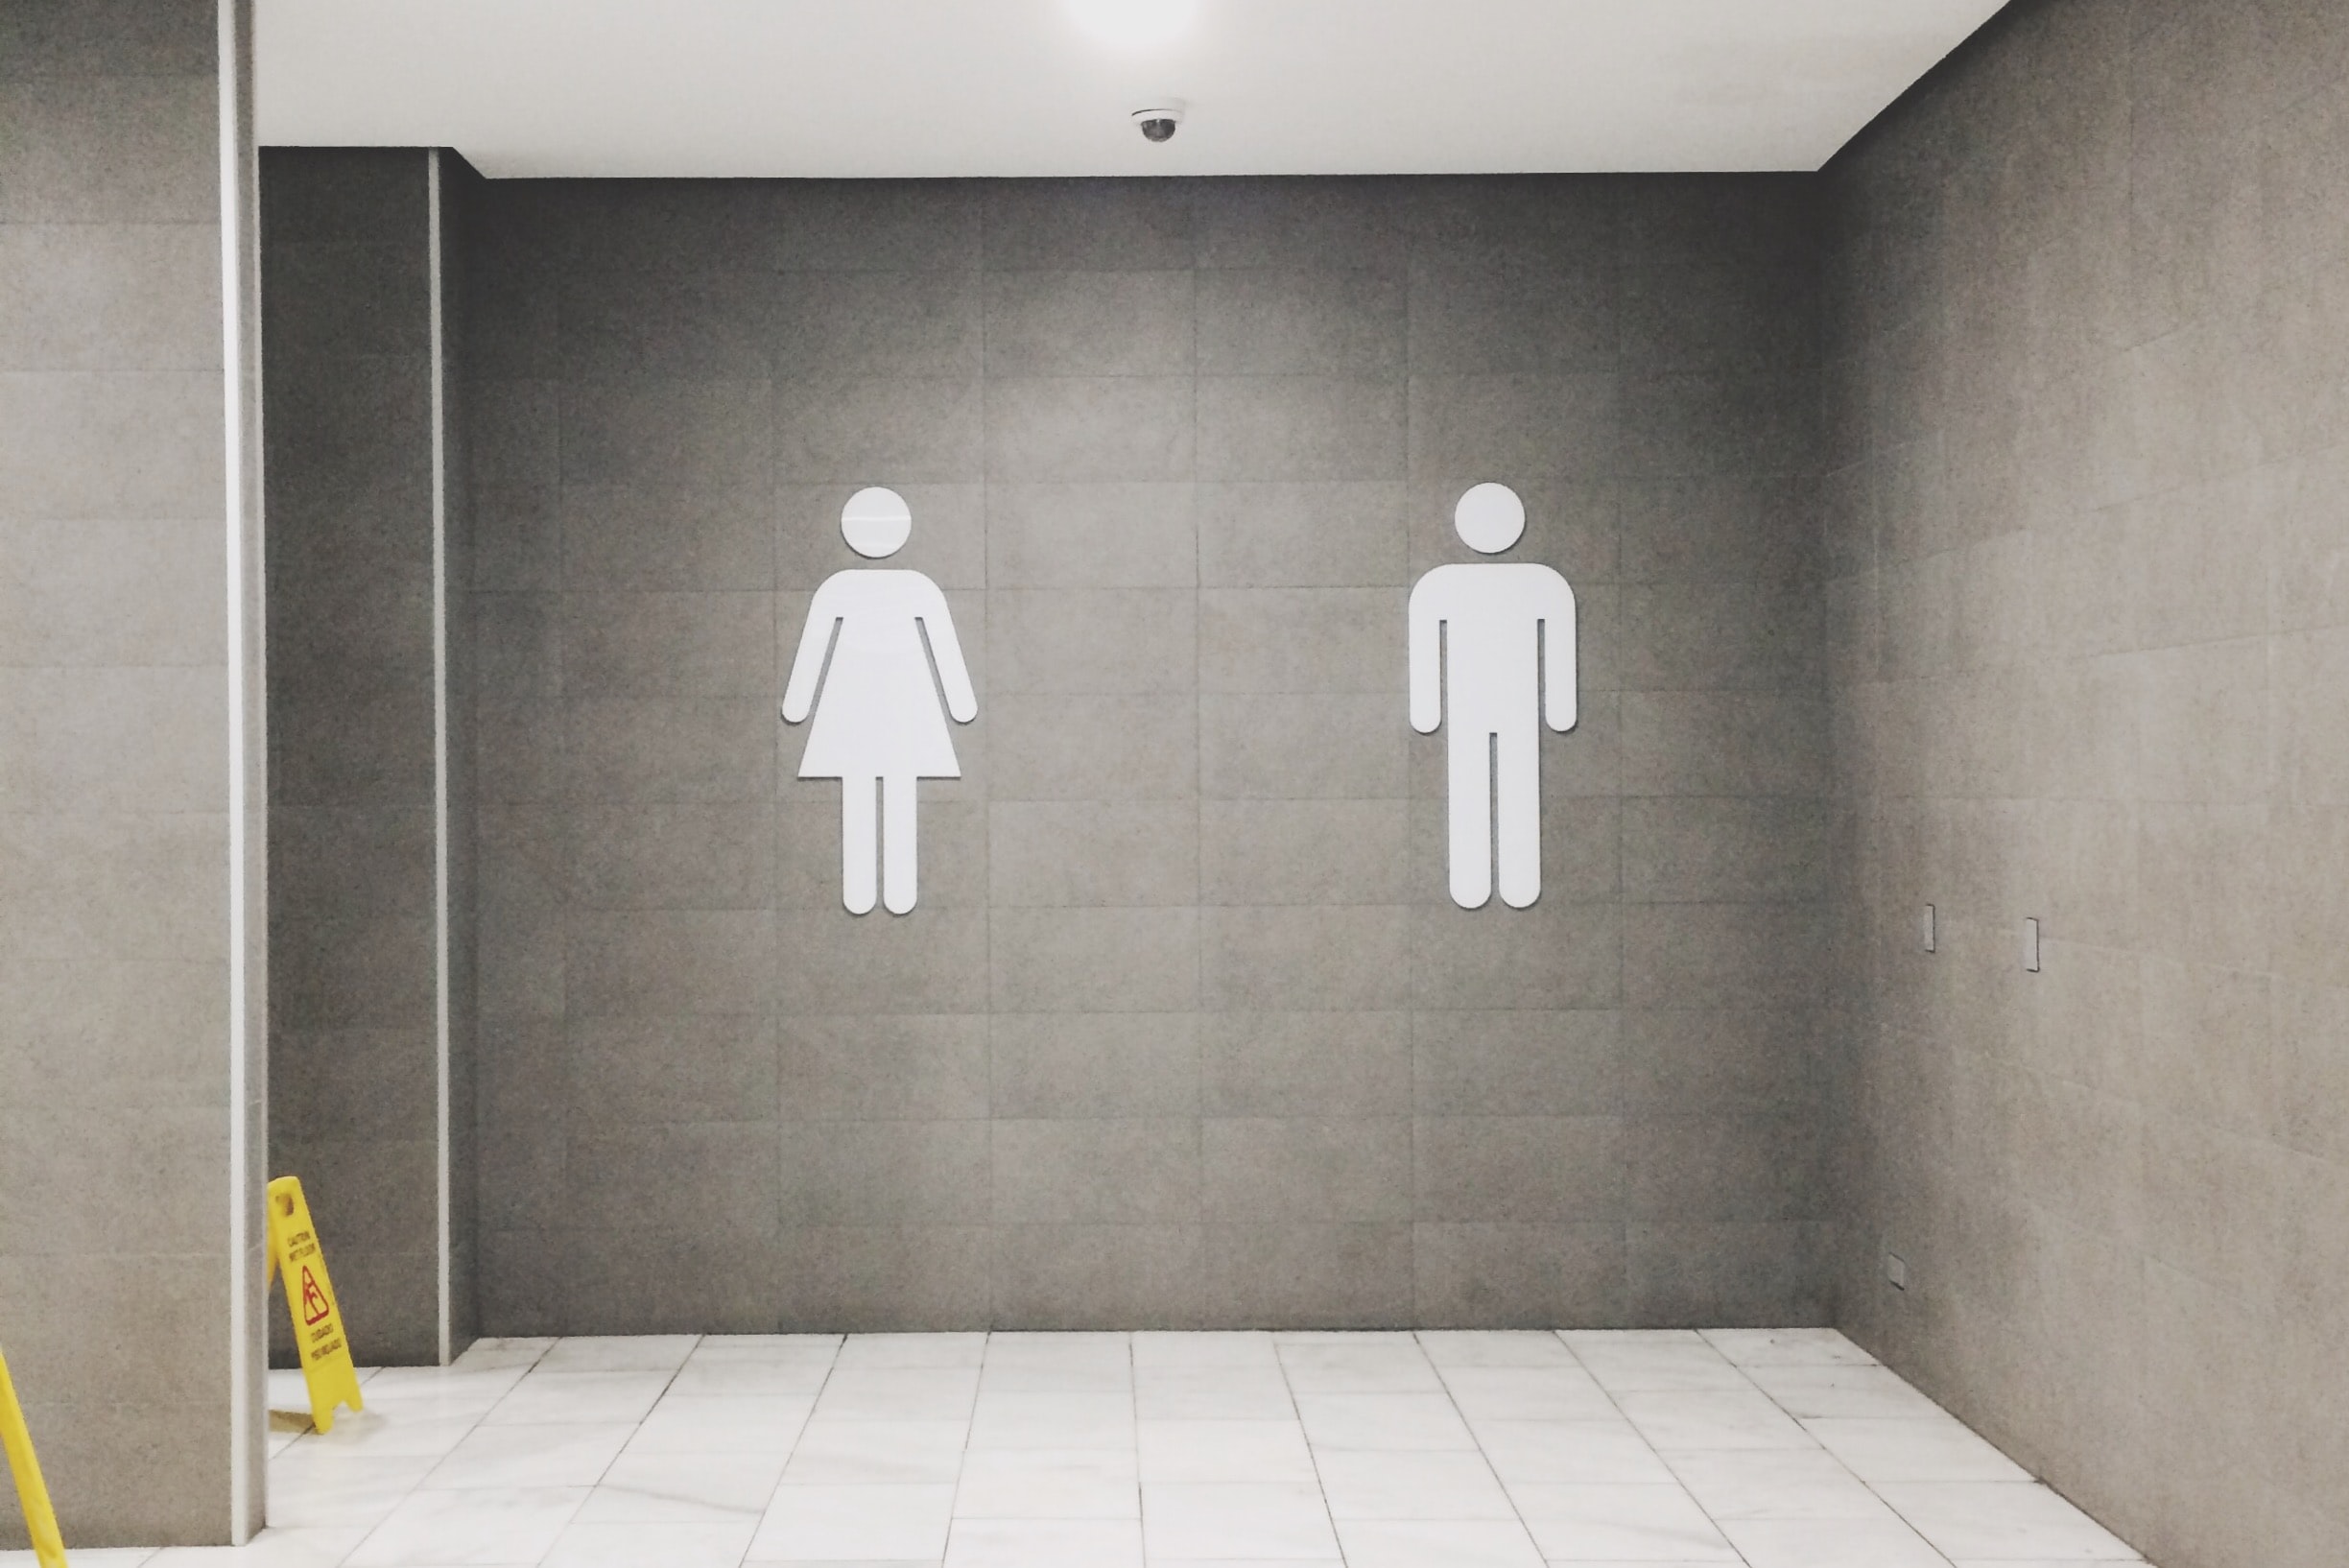 image of a restroom sign with male and female drawings | portable toilet rental washington oregon